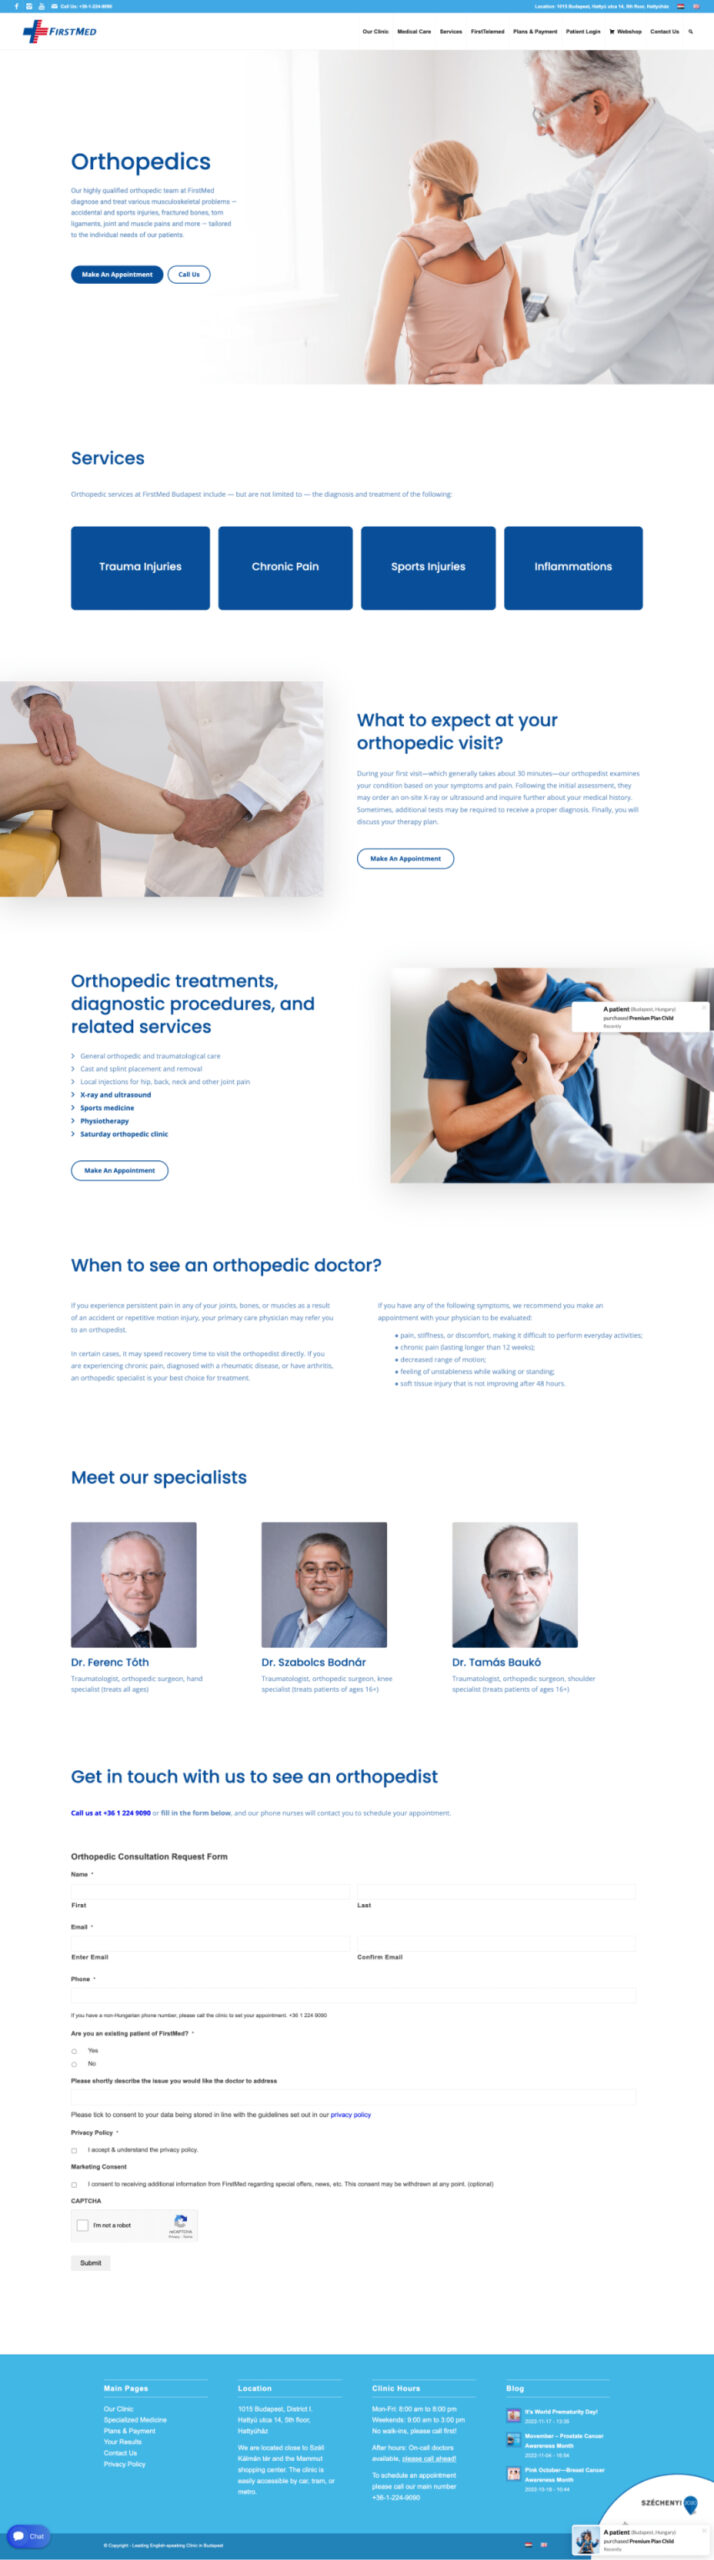 orthopedic services landing page